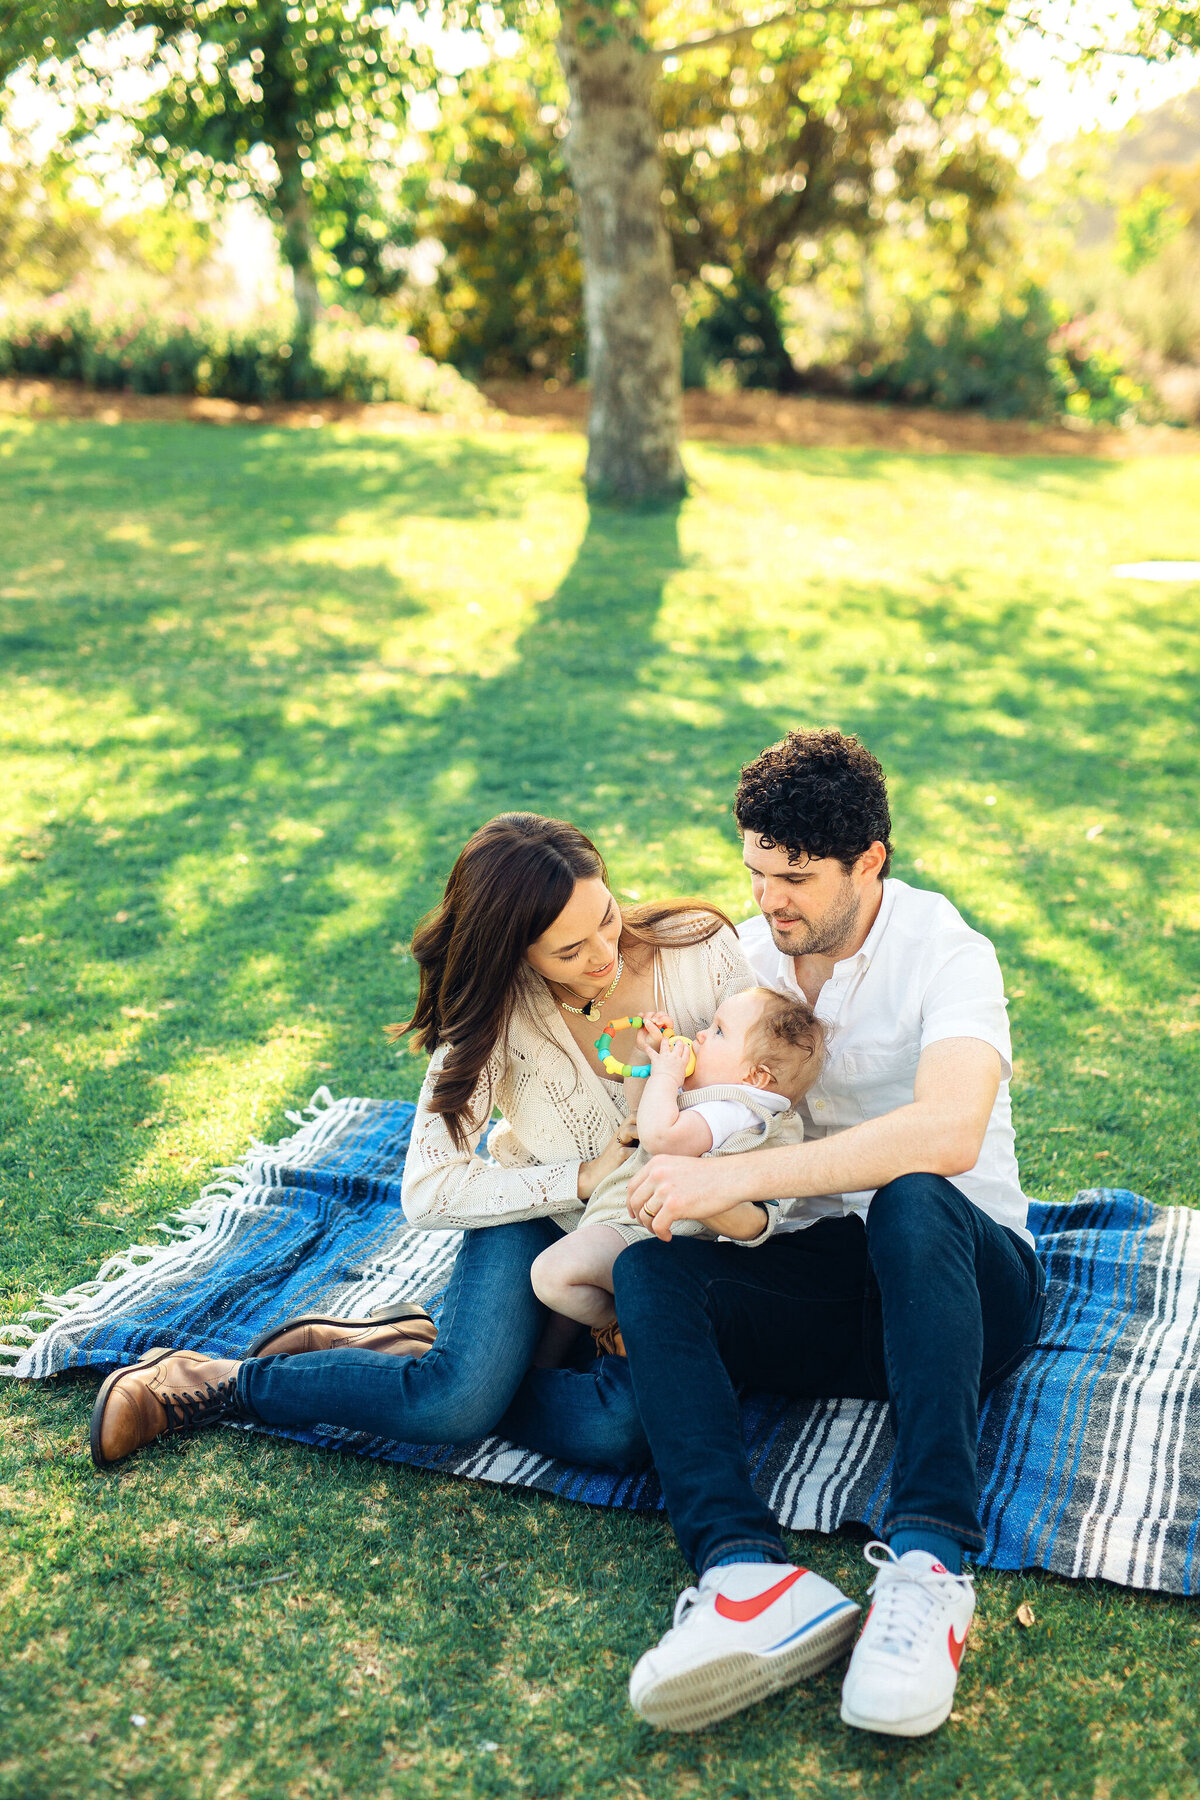 Family Portrait Photo Of Couple Holding Their Baby Who's Biting a Teether Los Angeles